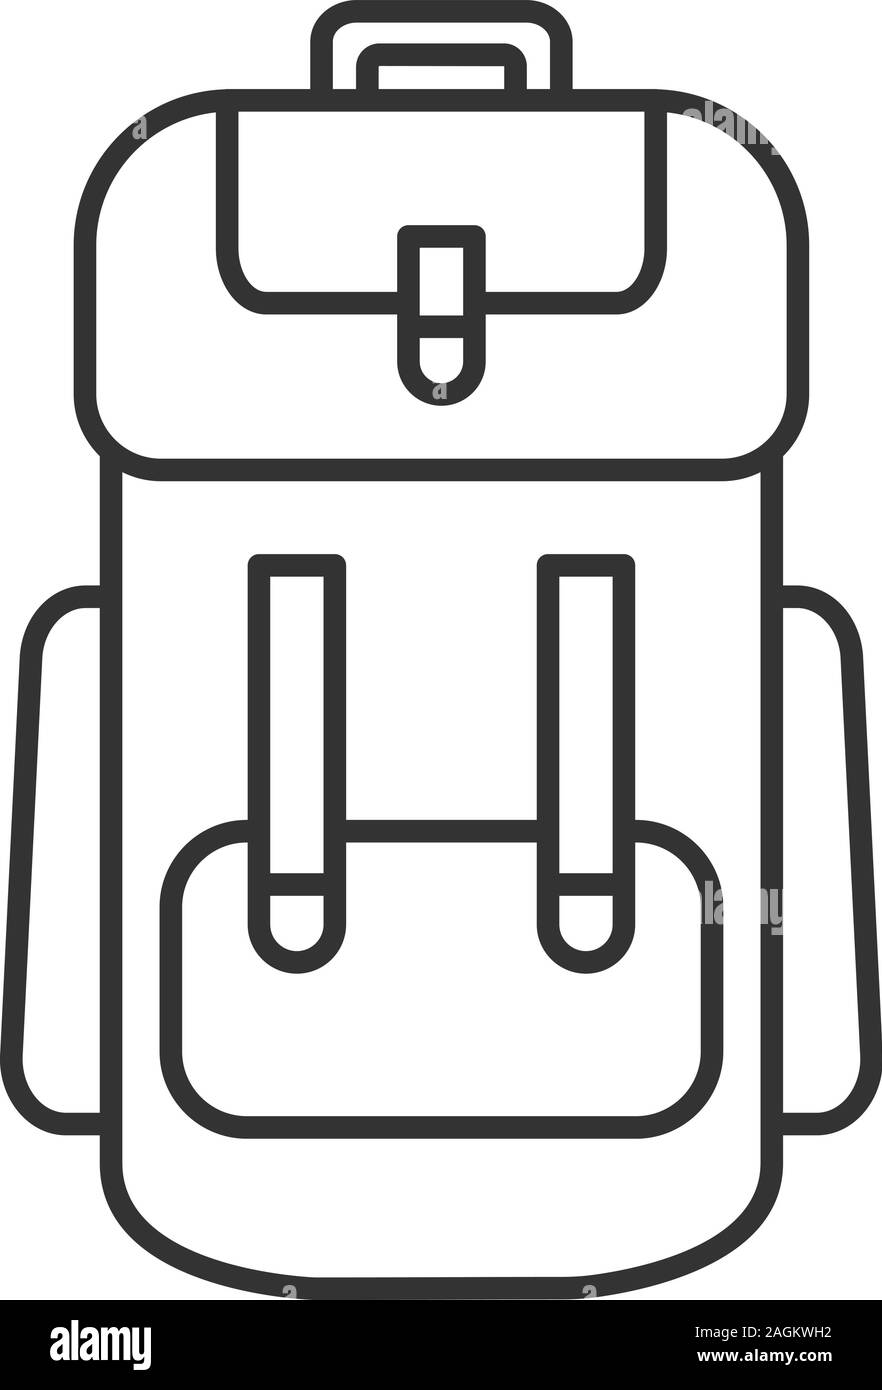 Backpack Clipart, Free & Premium Files